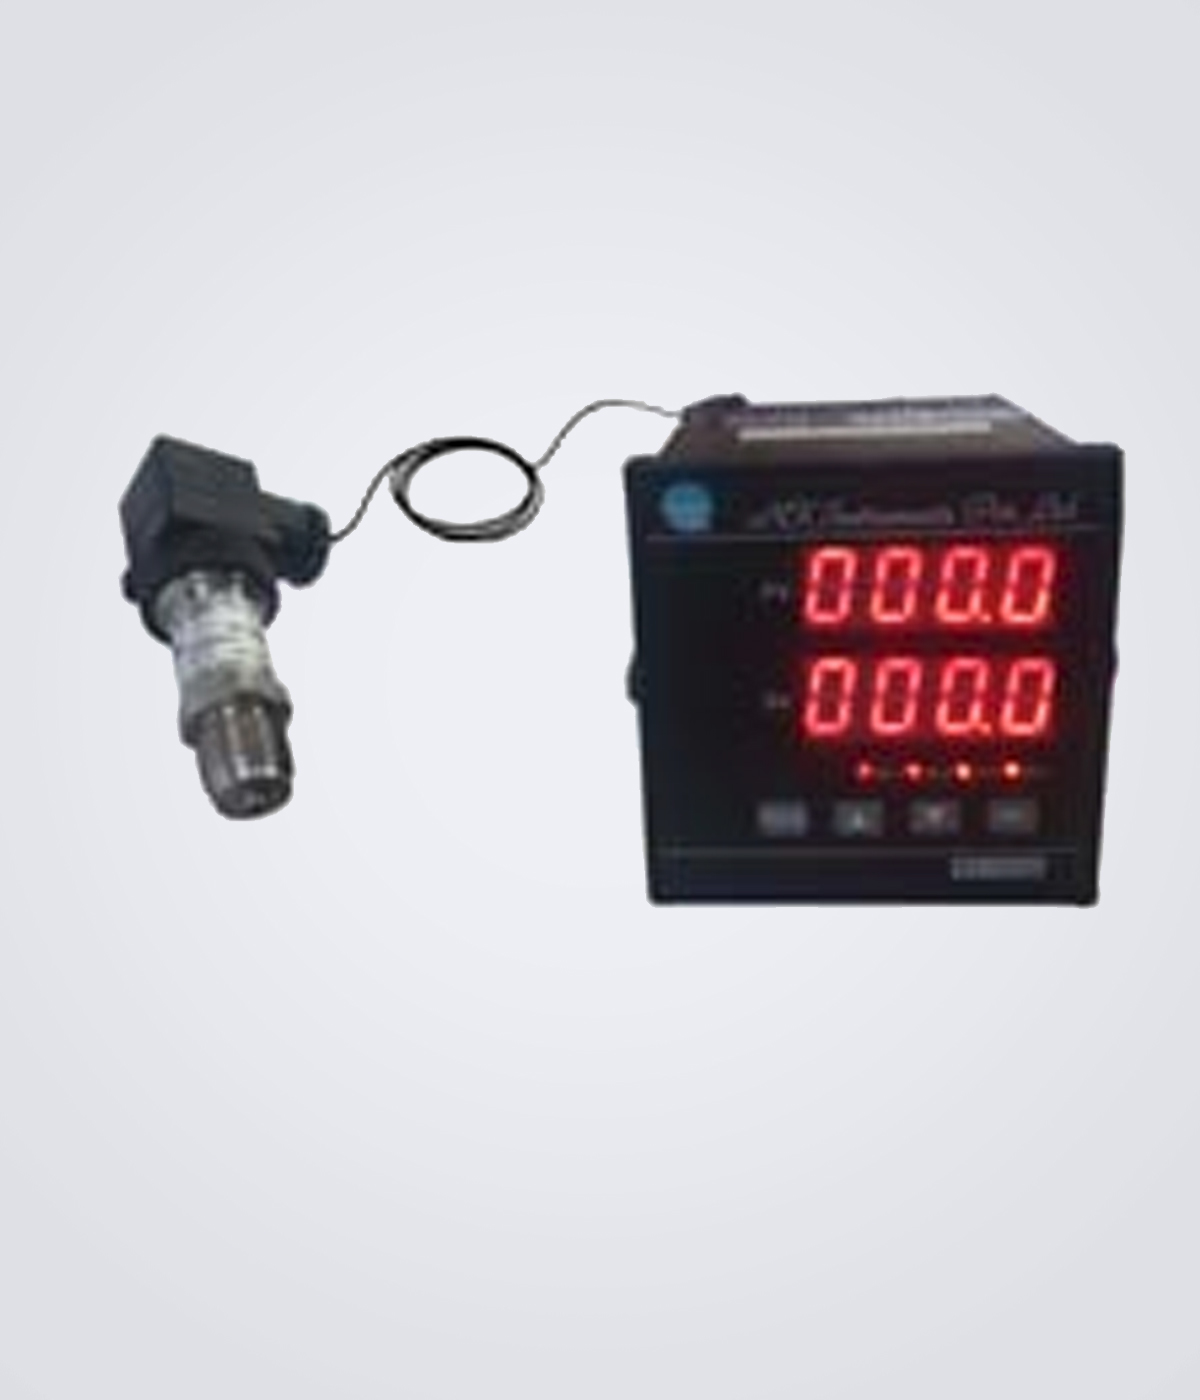 Digital Pressure Switch with Panel mounted Digital Display